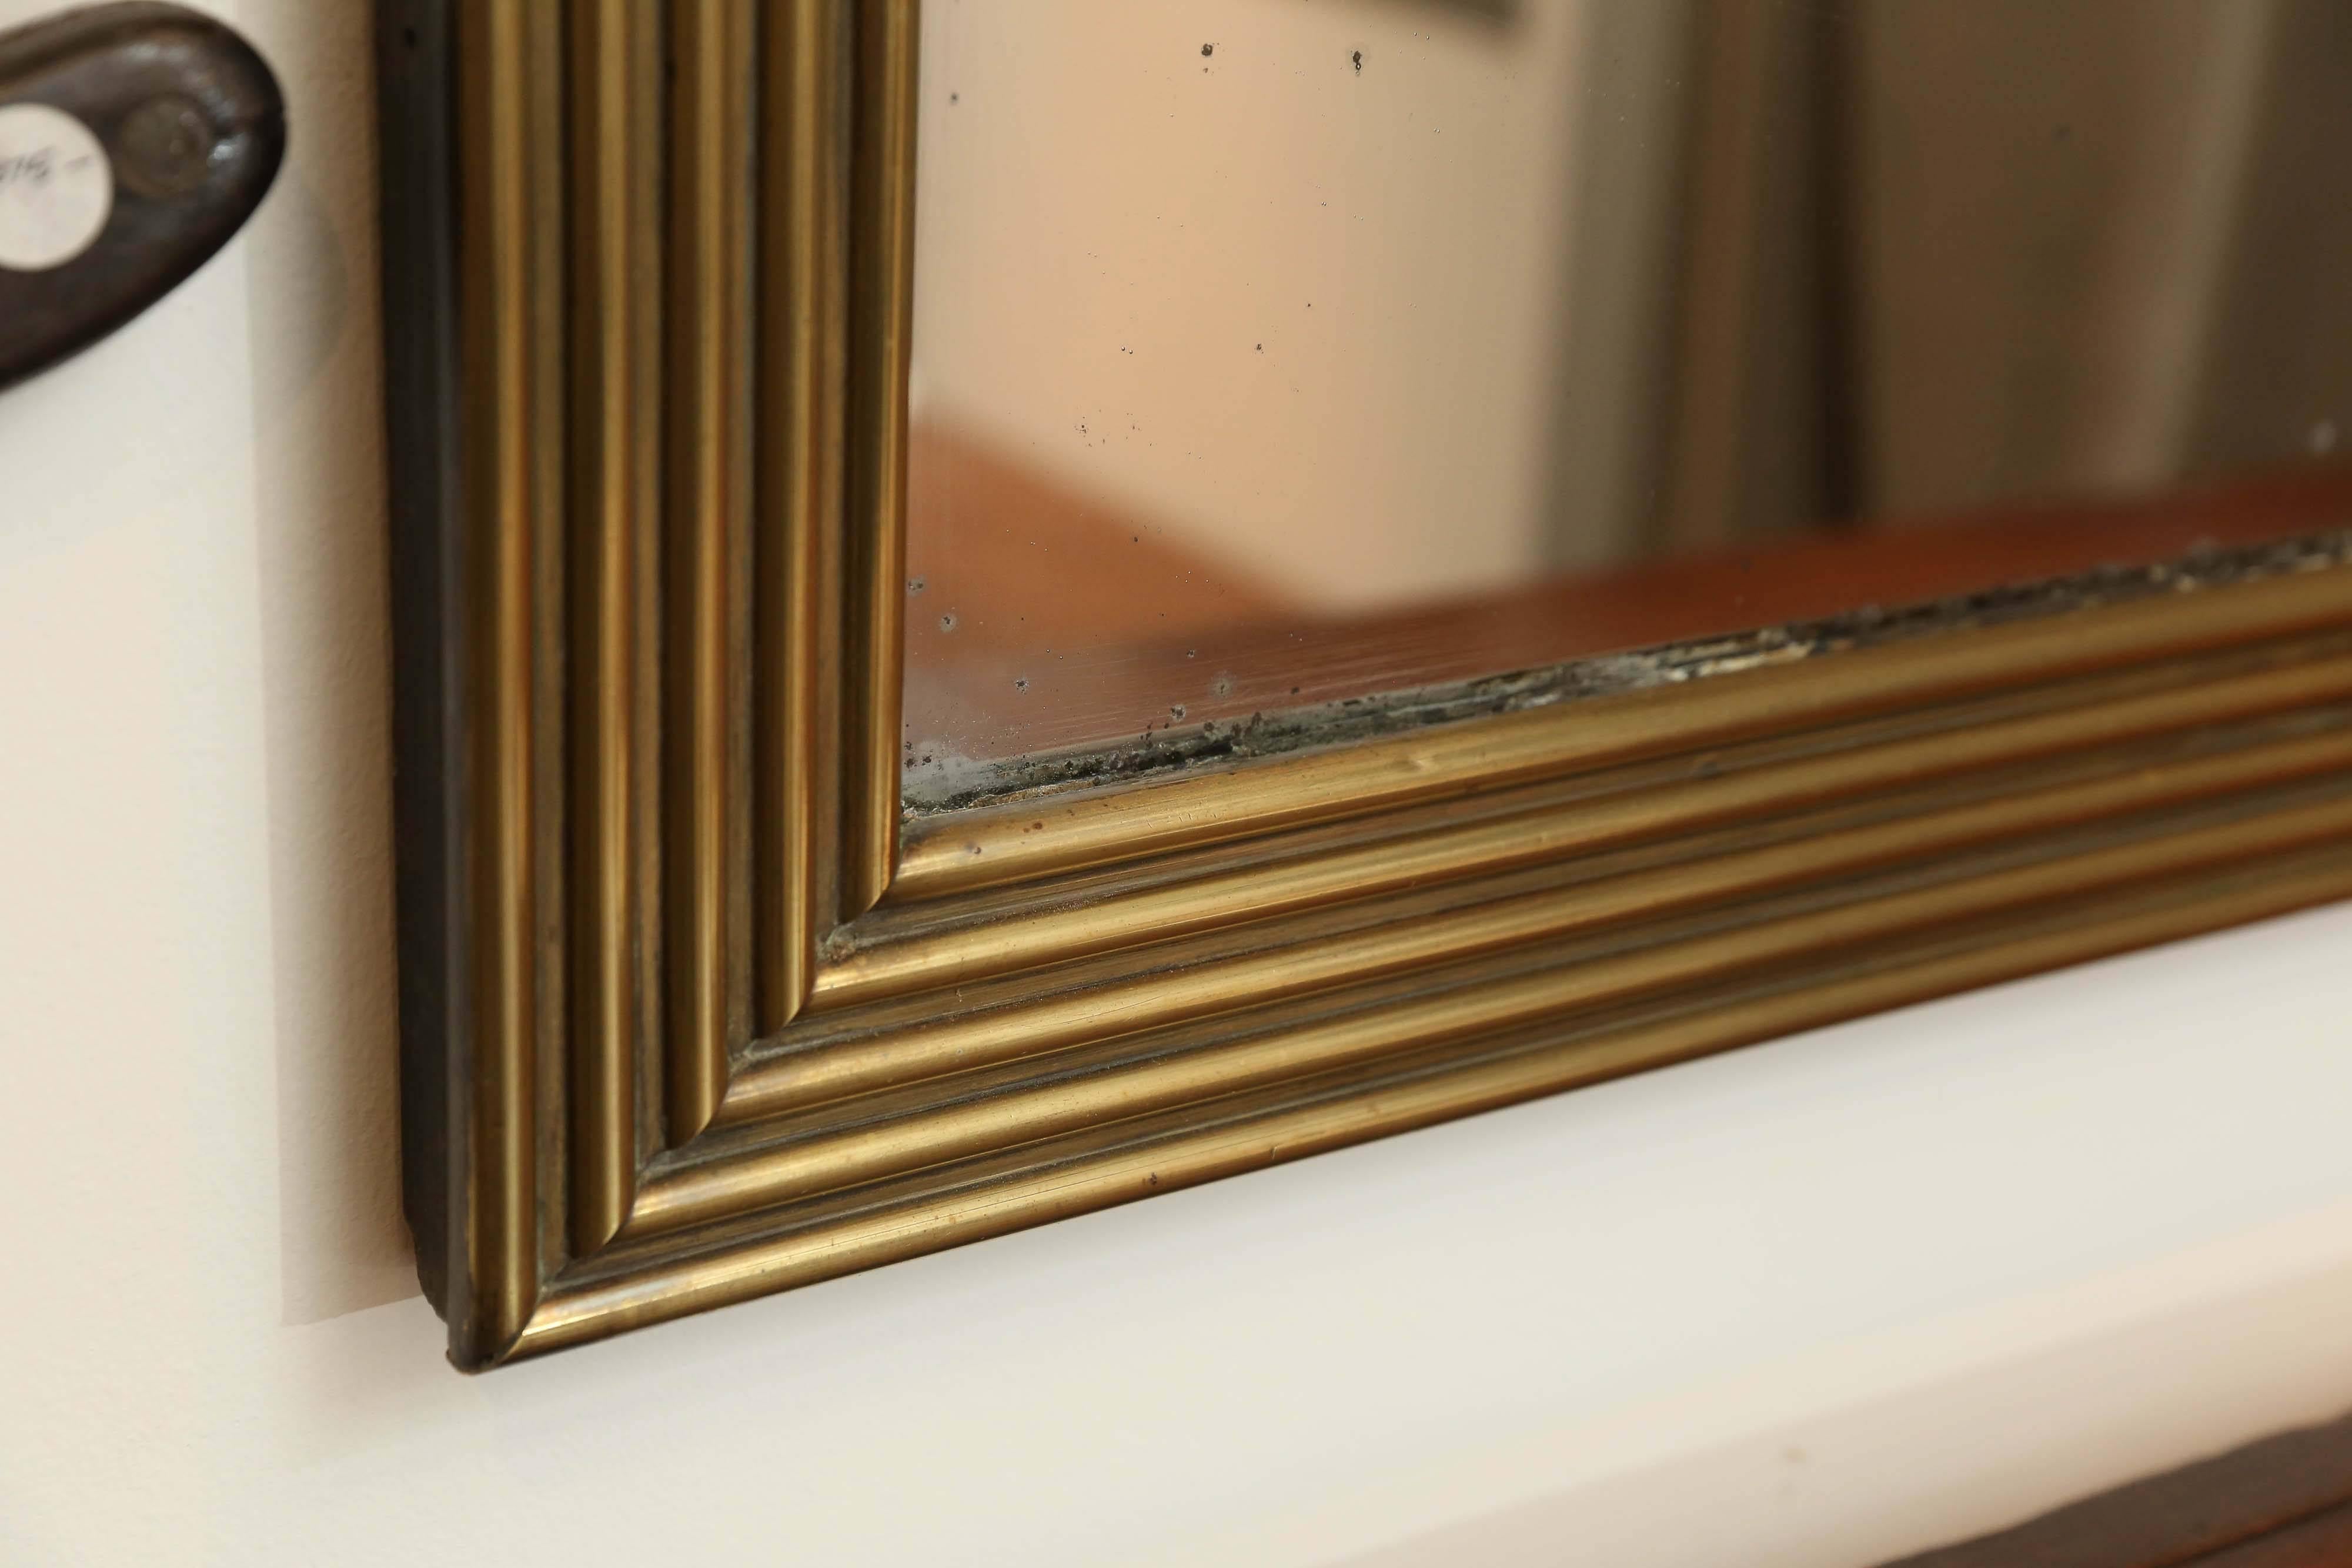 19th century brass mirror often found in French Bistros that wanted a more economical alternative to gilt mirrors. Beautiful craftsmanship of the layers and layers of brass that were used to make this raised reeded design. The brass has been cleaned